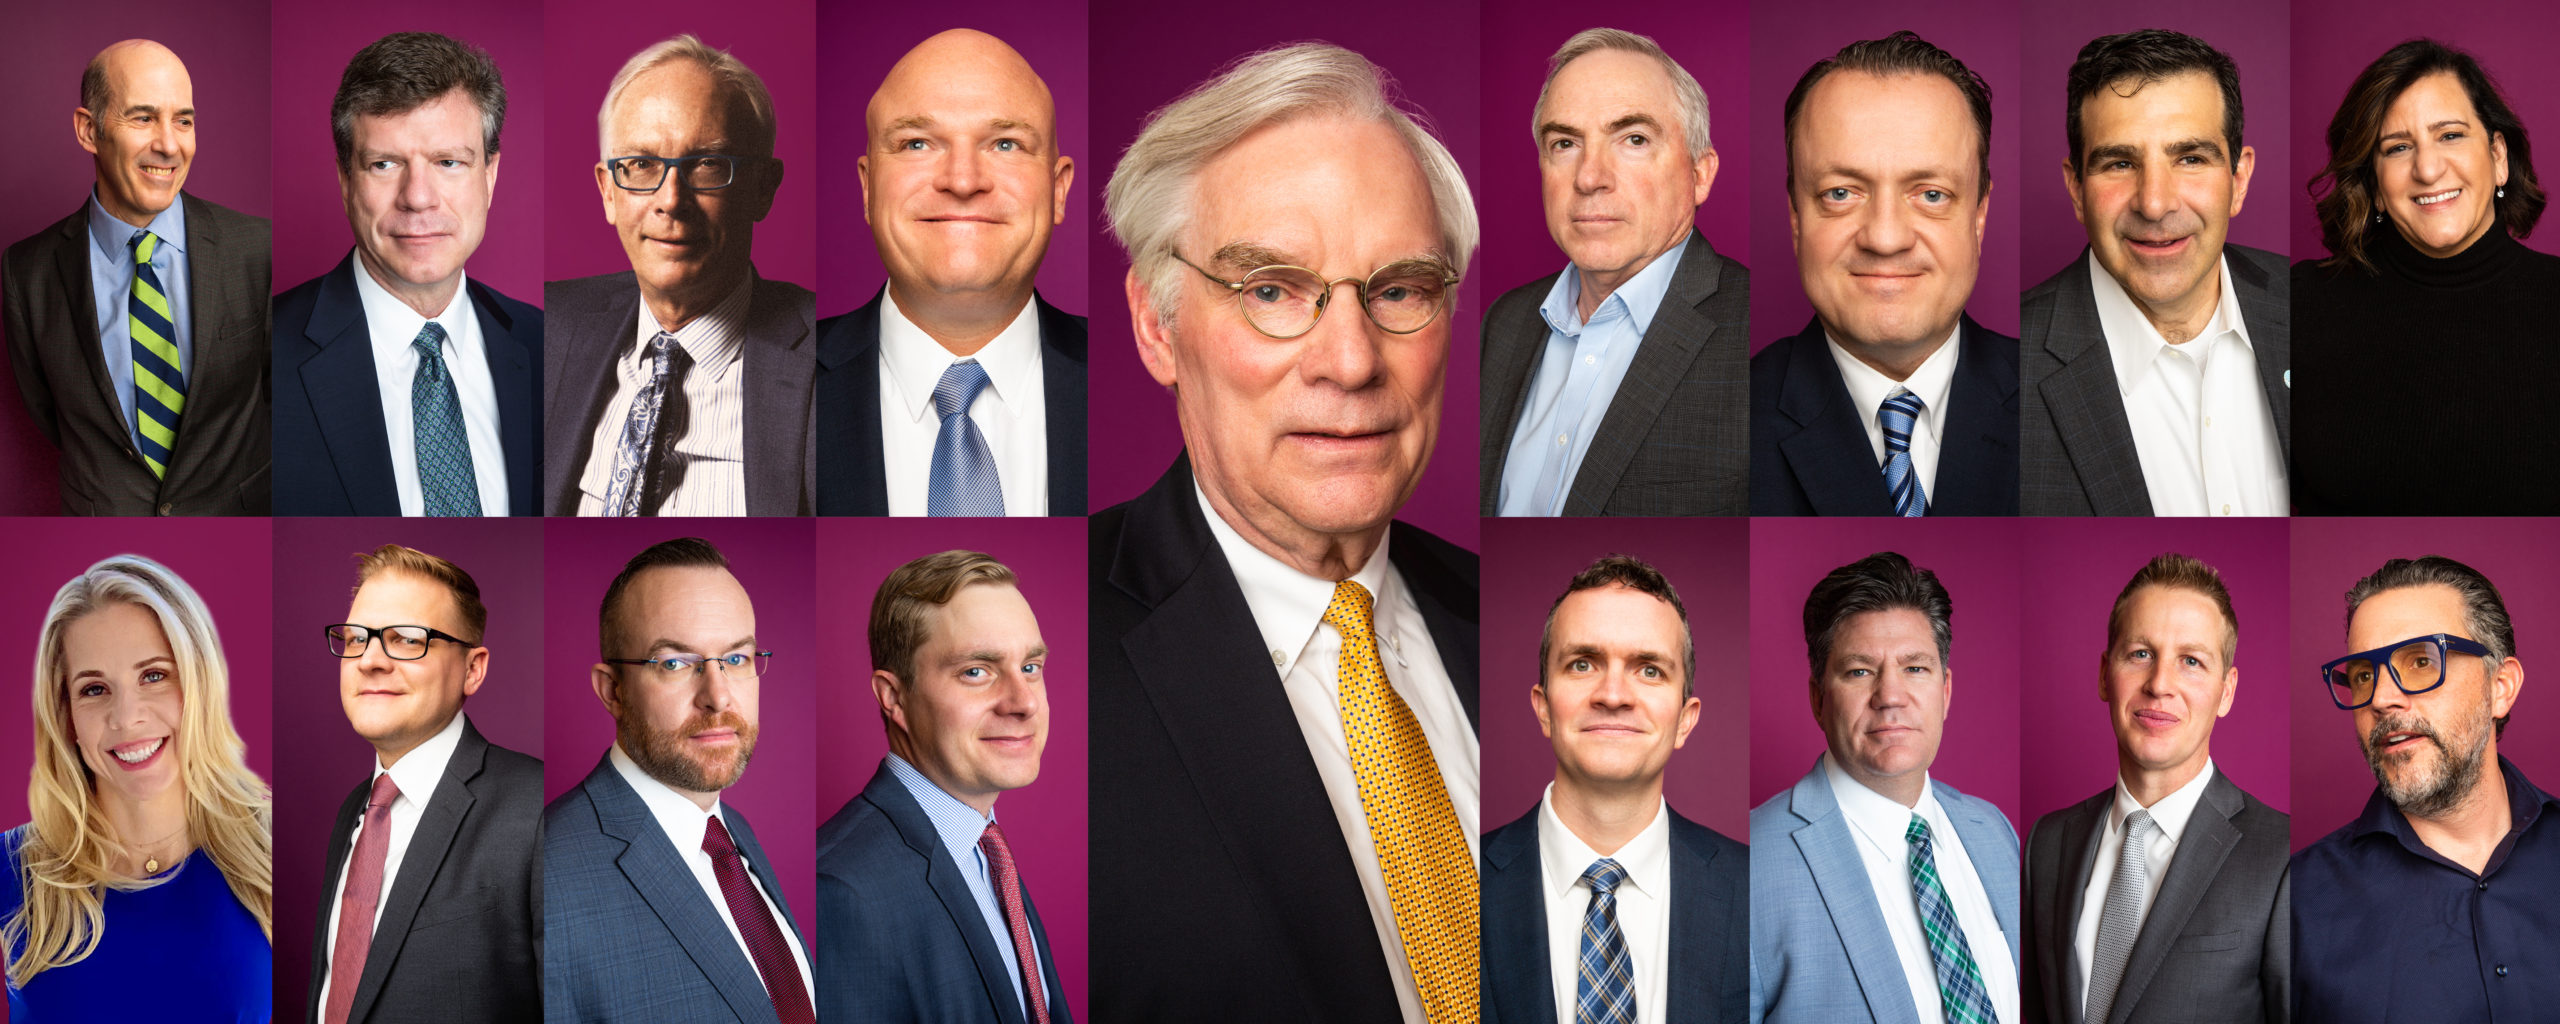 Meet the 2021 Corporate Counsel honorees who are helping Utah’s companies navigate the legalities of a post-pandemic world.